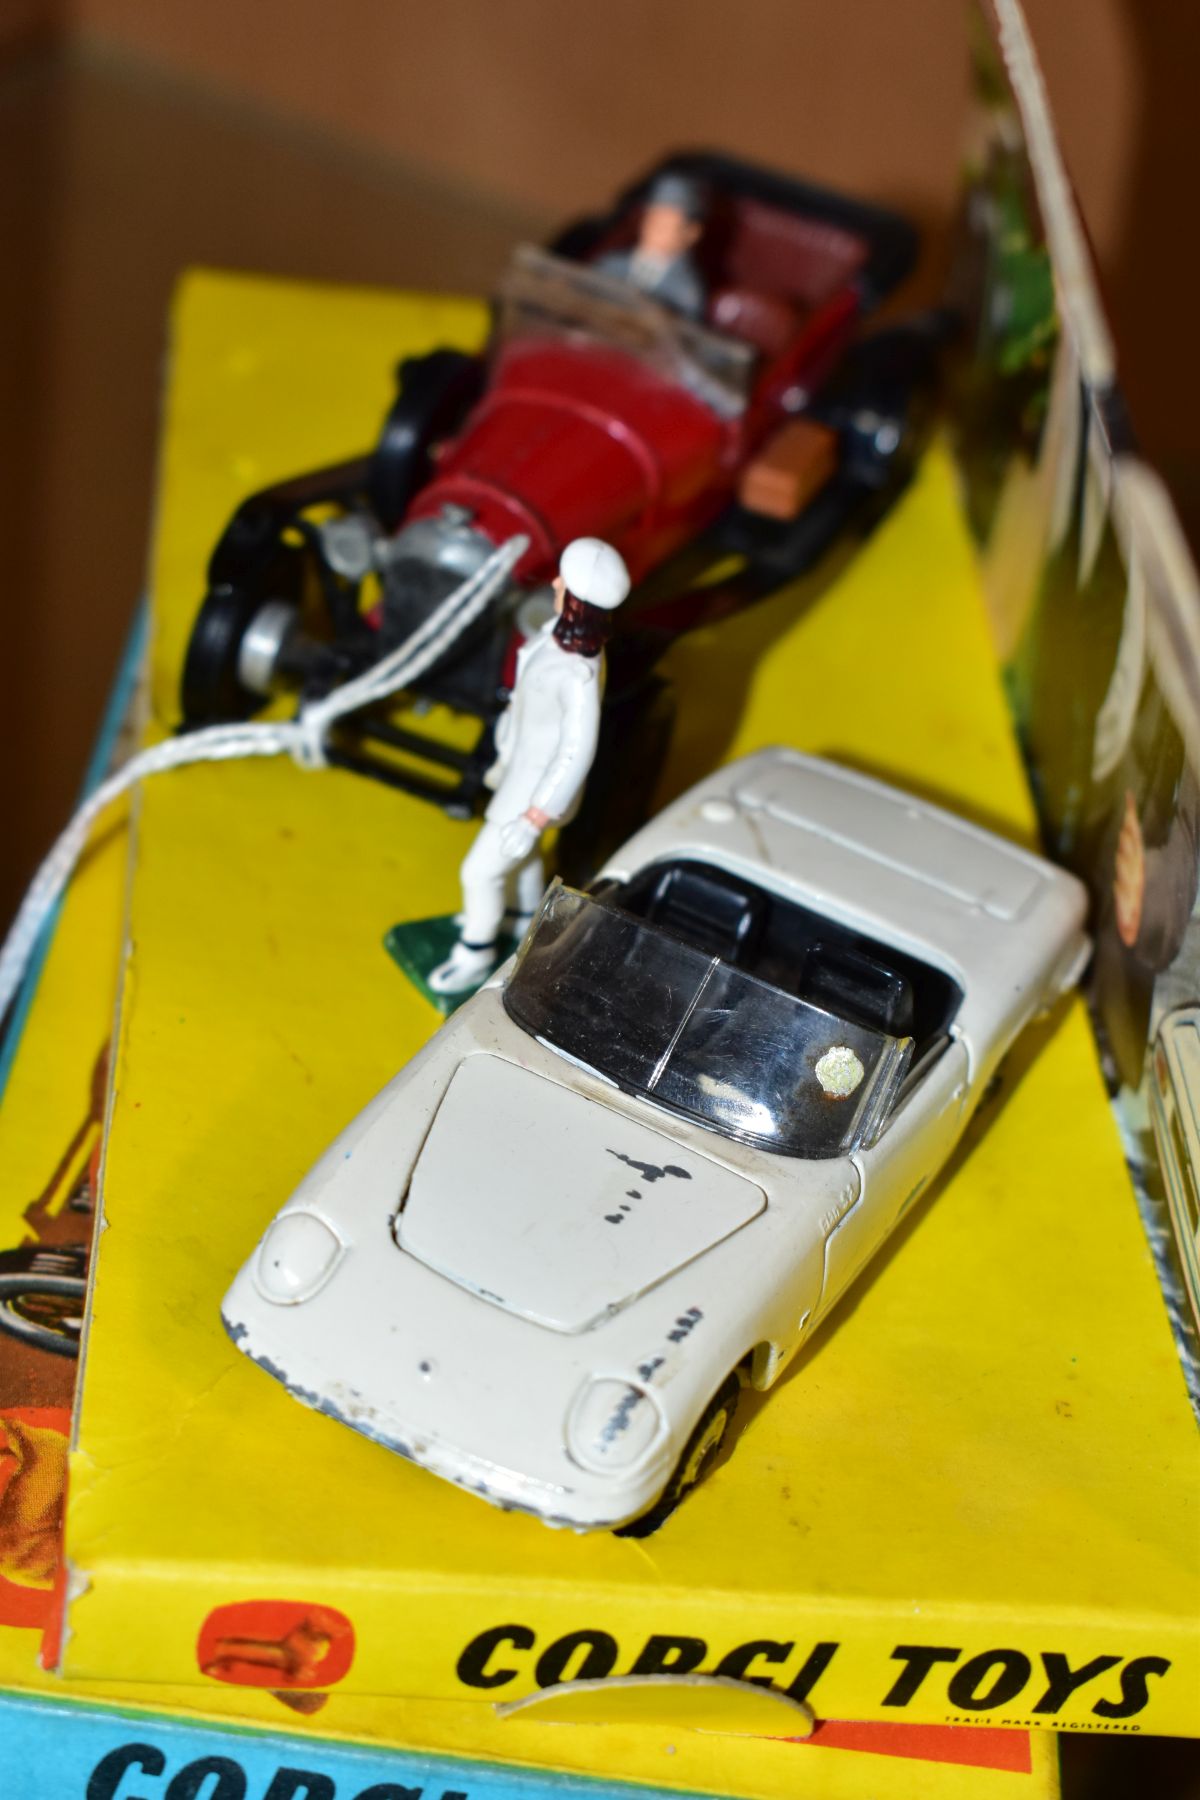 A BOXED CORGI TOYS THE AVENGERS GIFT SET, No 40, red and black Bentley with wire wheels, damage to - Image 6 of 9